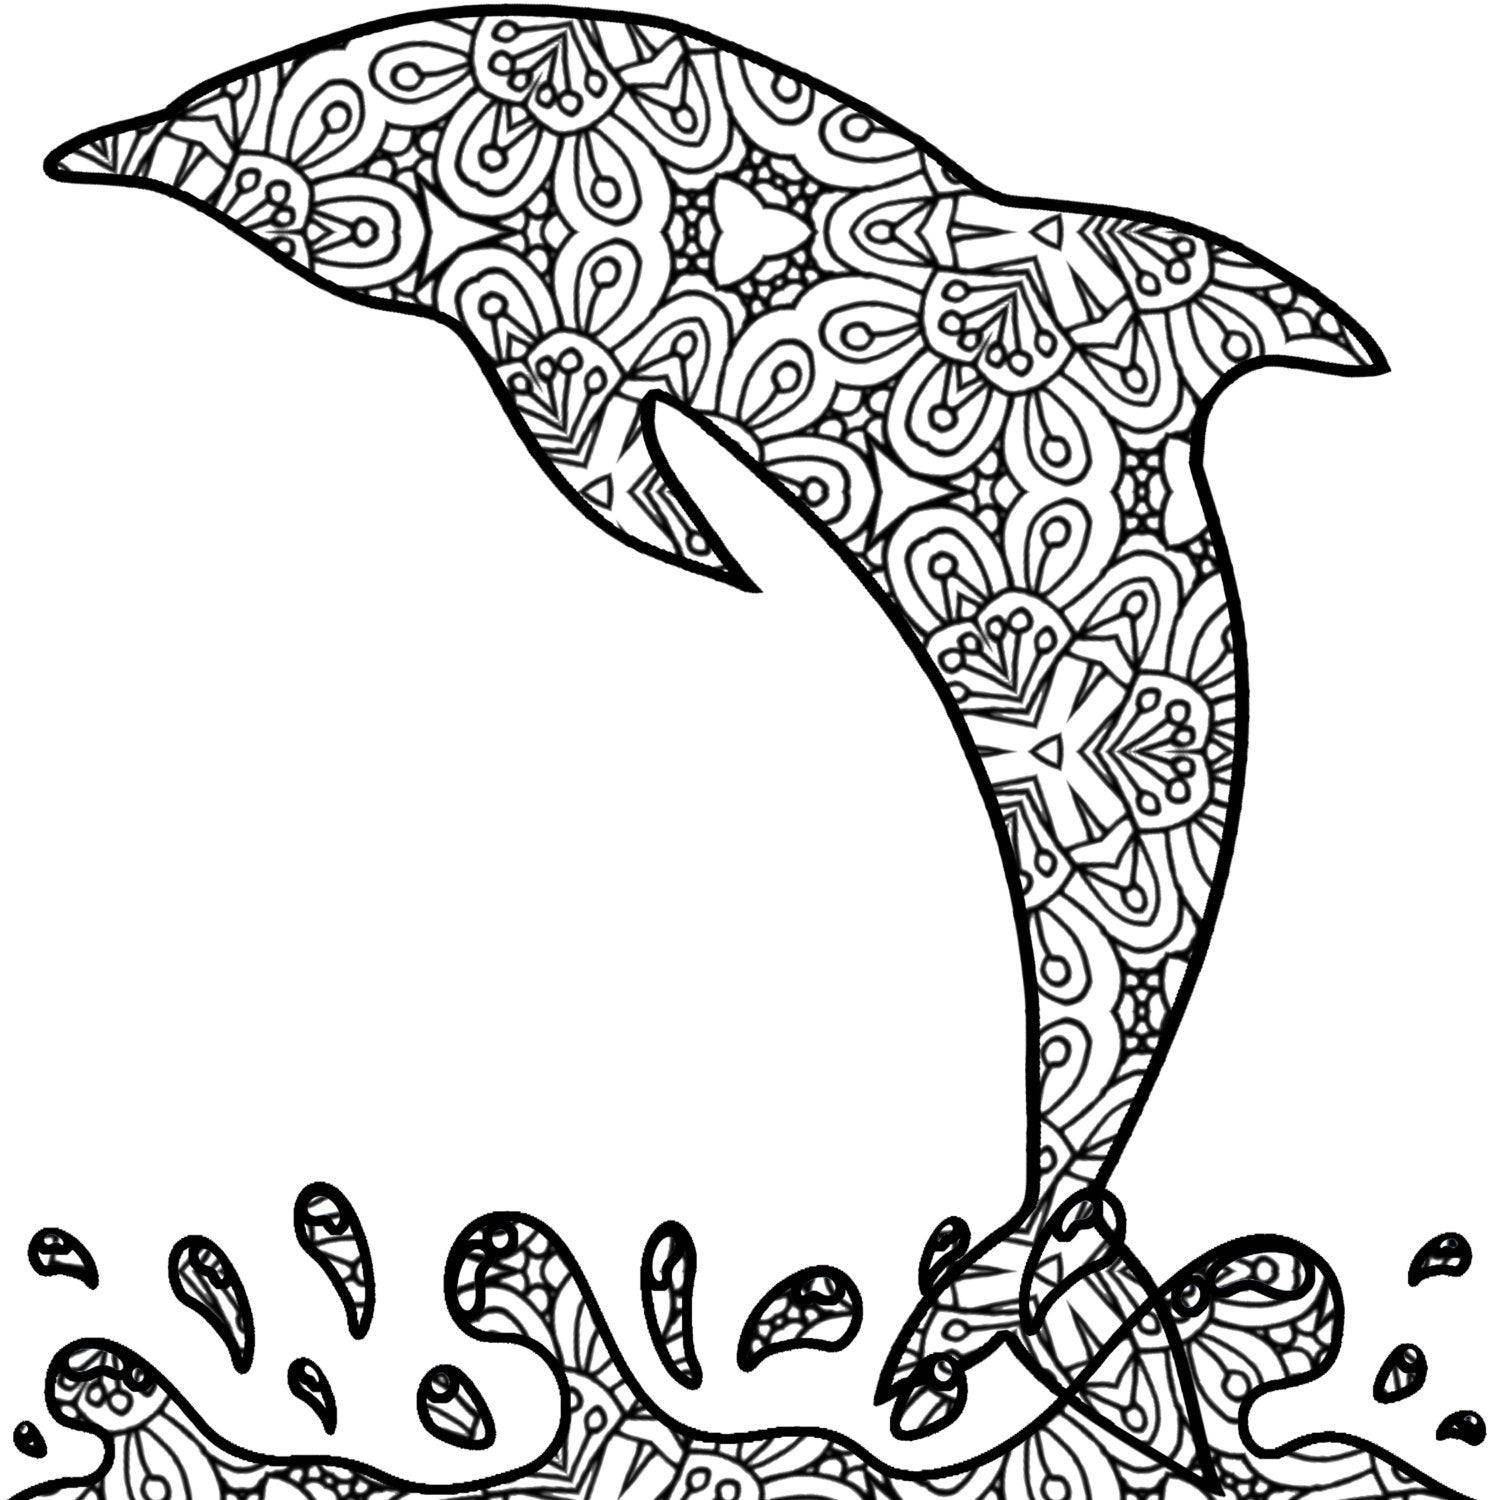 Dolphin Coloring Pages Pdf : Dec, 19 2011 4790 downloads 12280 views marine  mammals > dolphin.